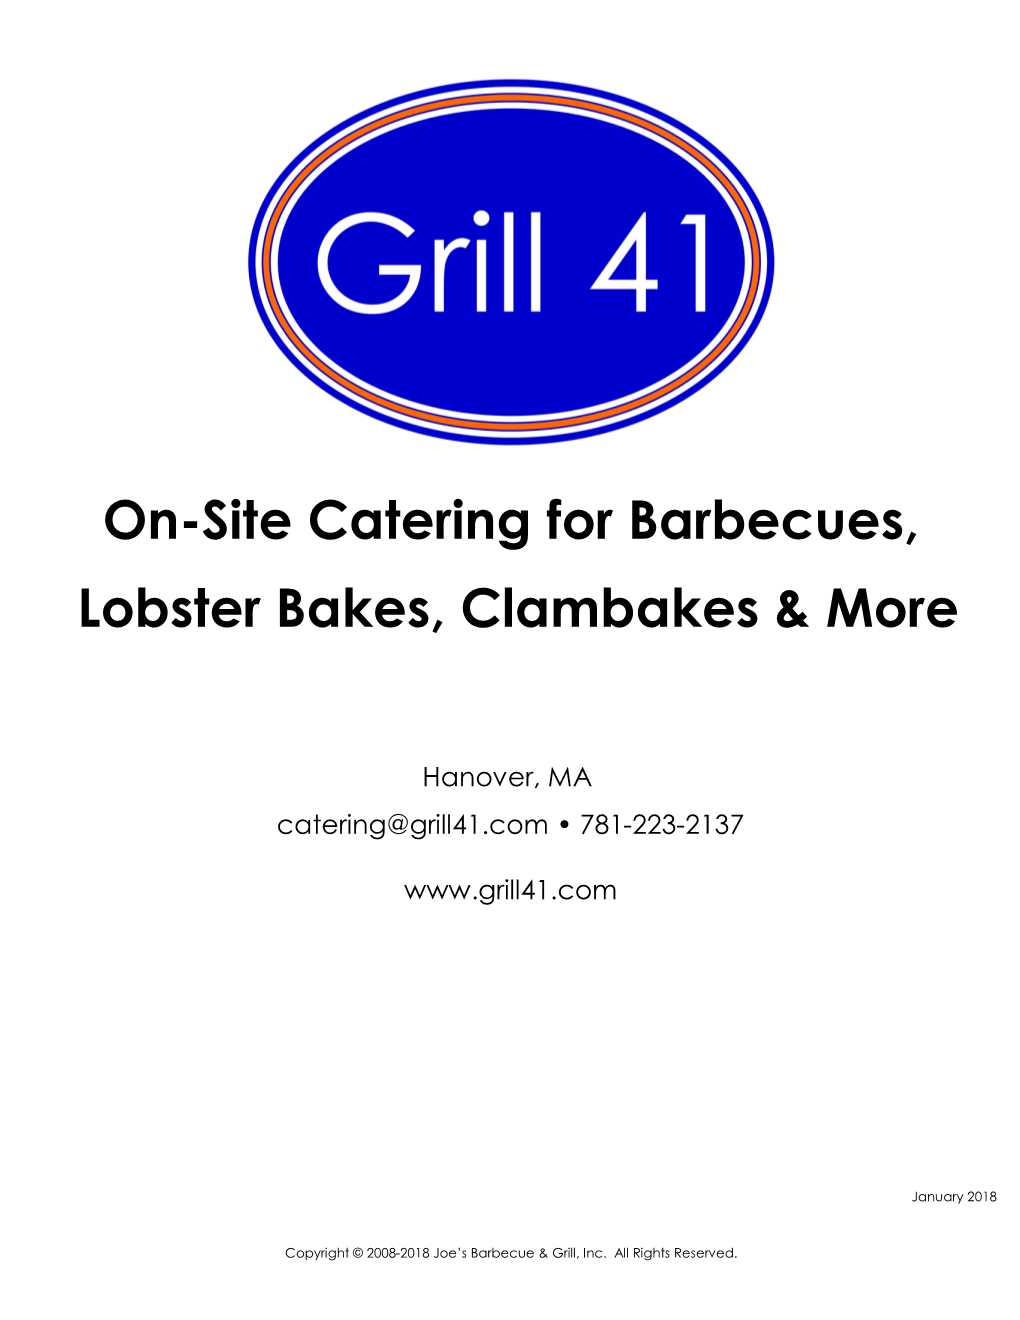 On-Site Catering for Barbecues, Lobster Bakes, Clambakes & More